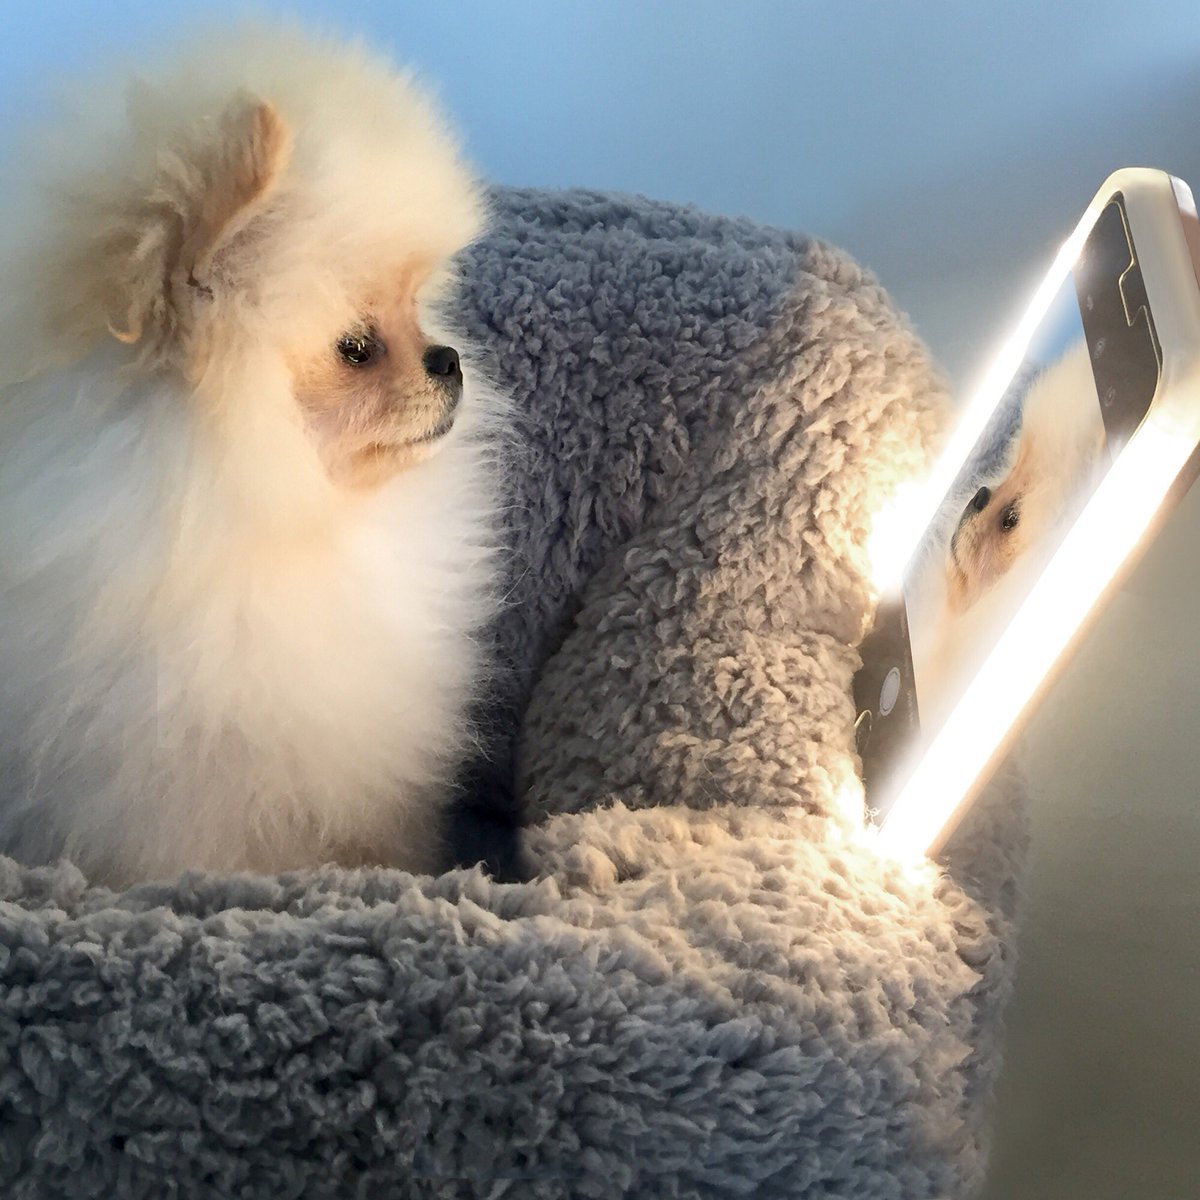 How cute is Sushi using my phone lol
#ad @lumeecase 
50% off Labor Day sale at https://t.co/0FSgvkhsZF 
#litbylumee https://t.co/AT62IQvoL9